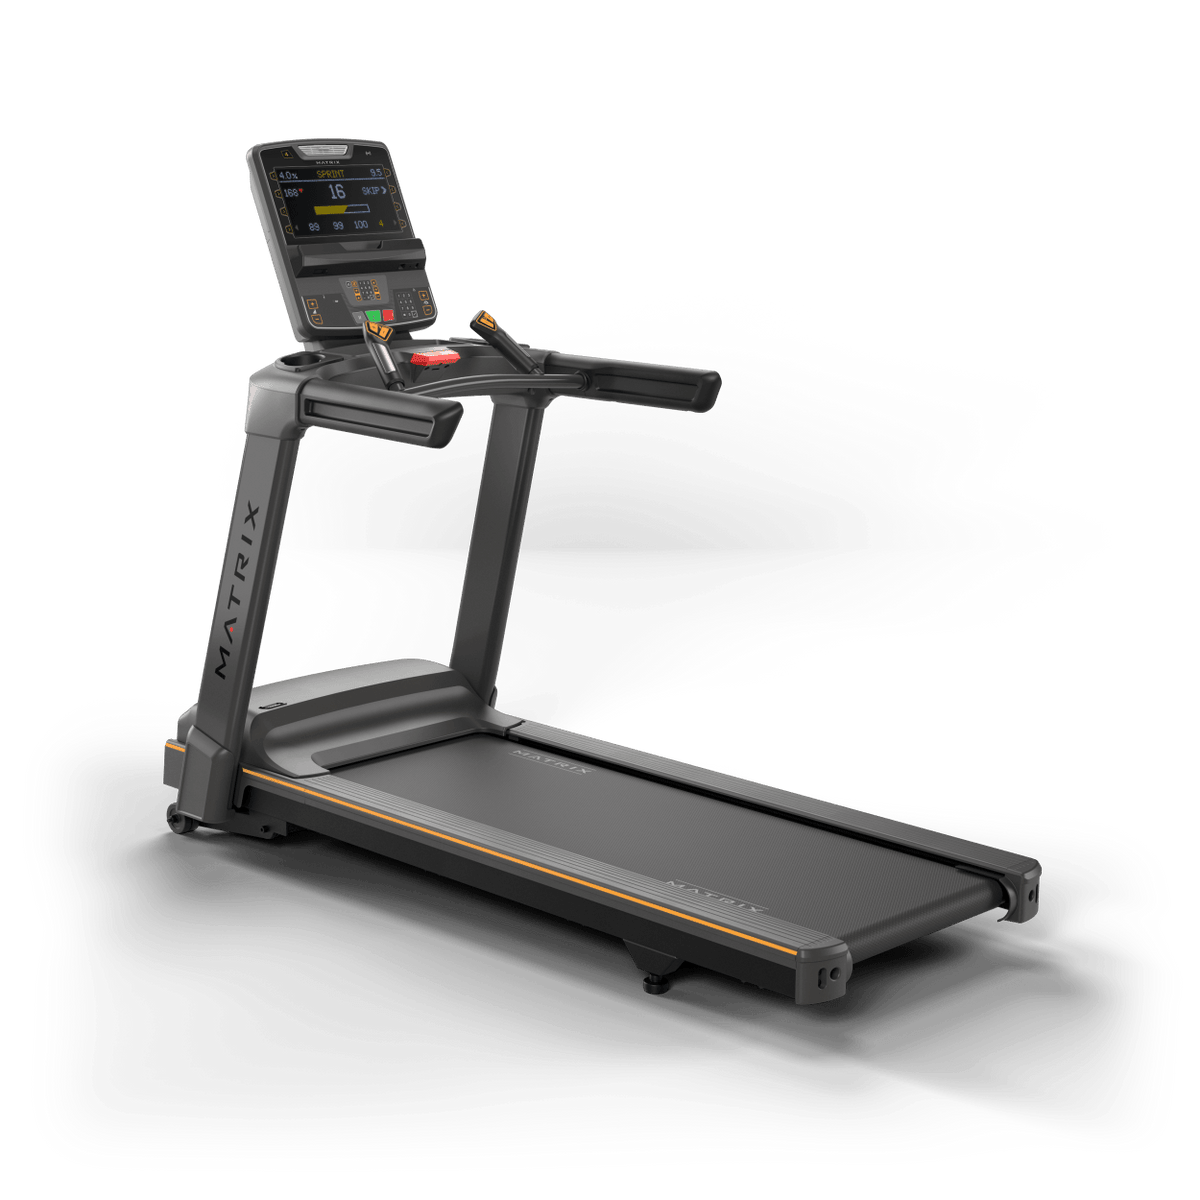 Matrix Fitness Lifestyle Treadmill with Premium LED Console full view | Fitness Experience